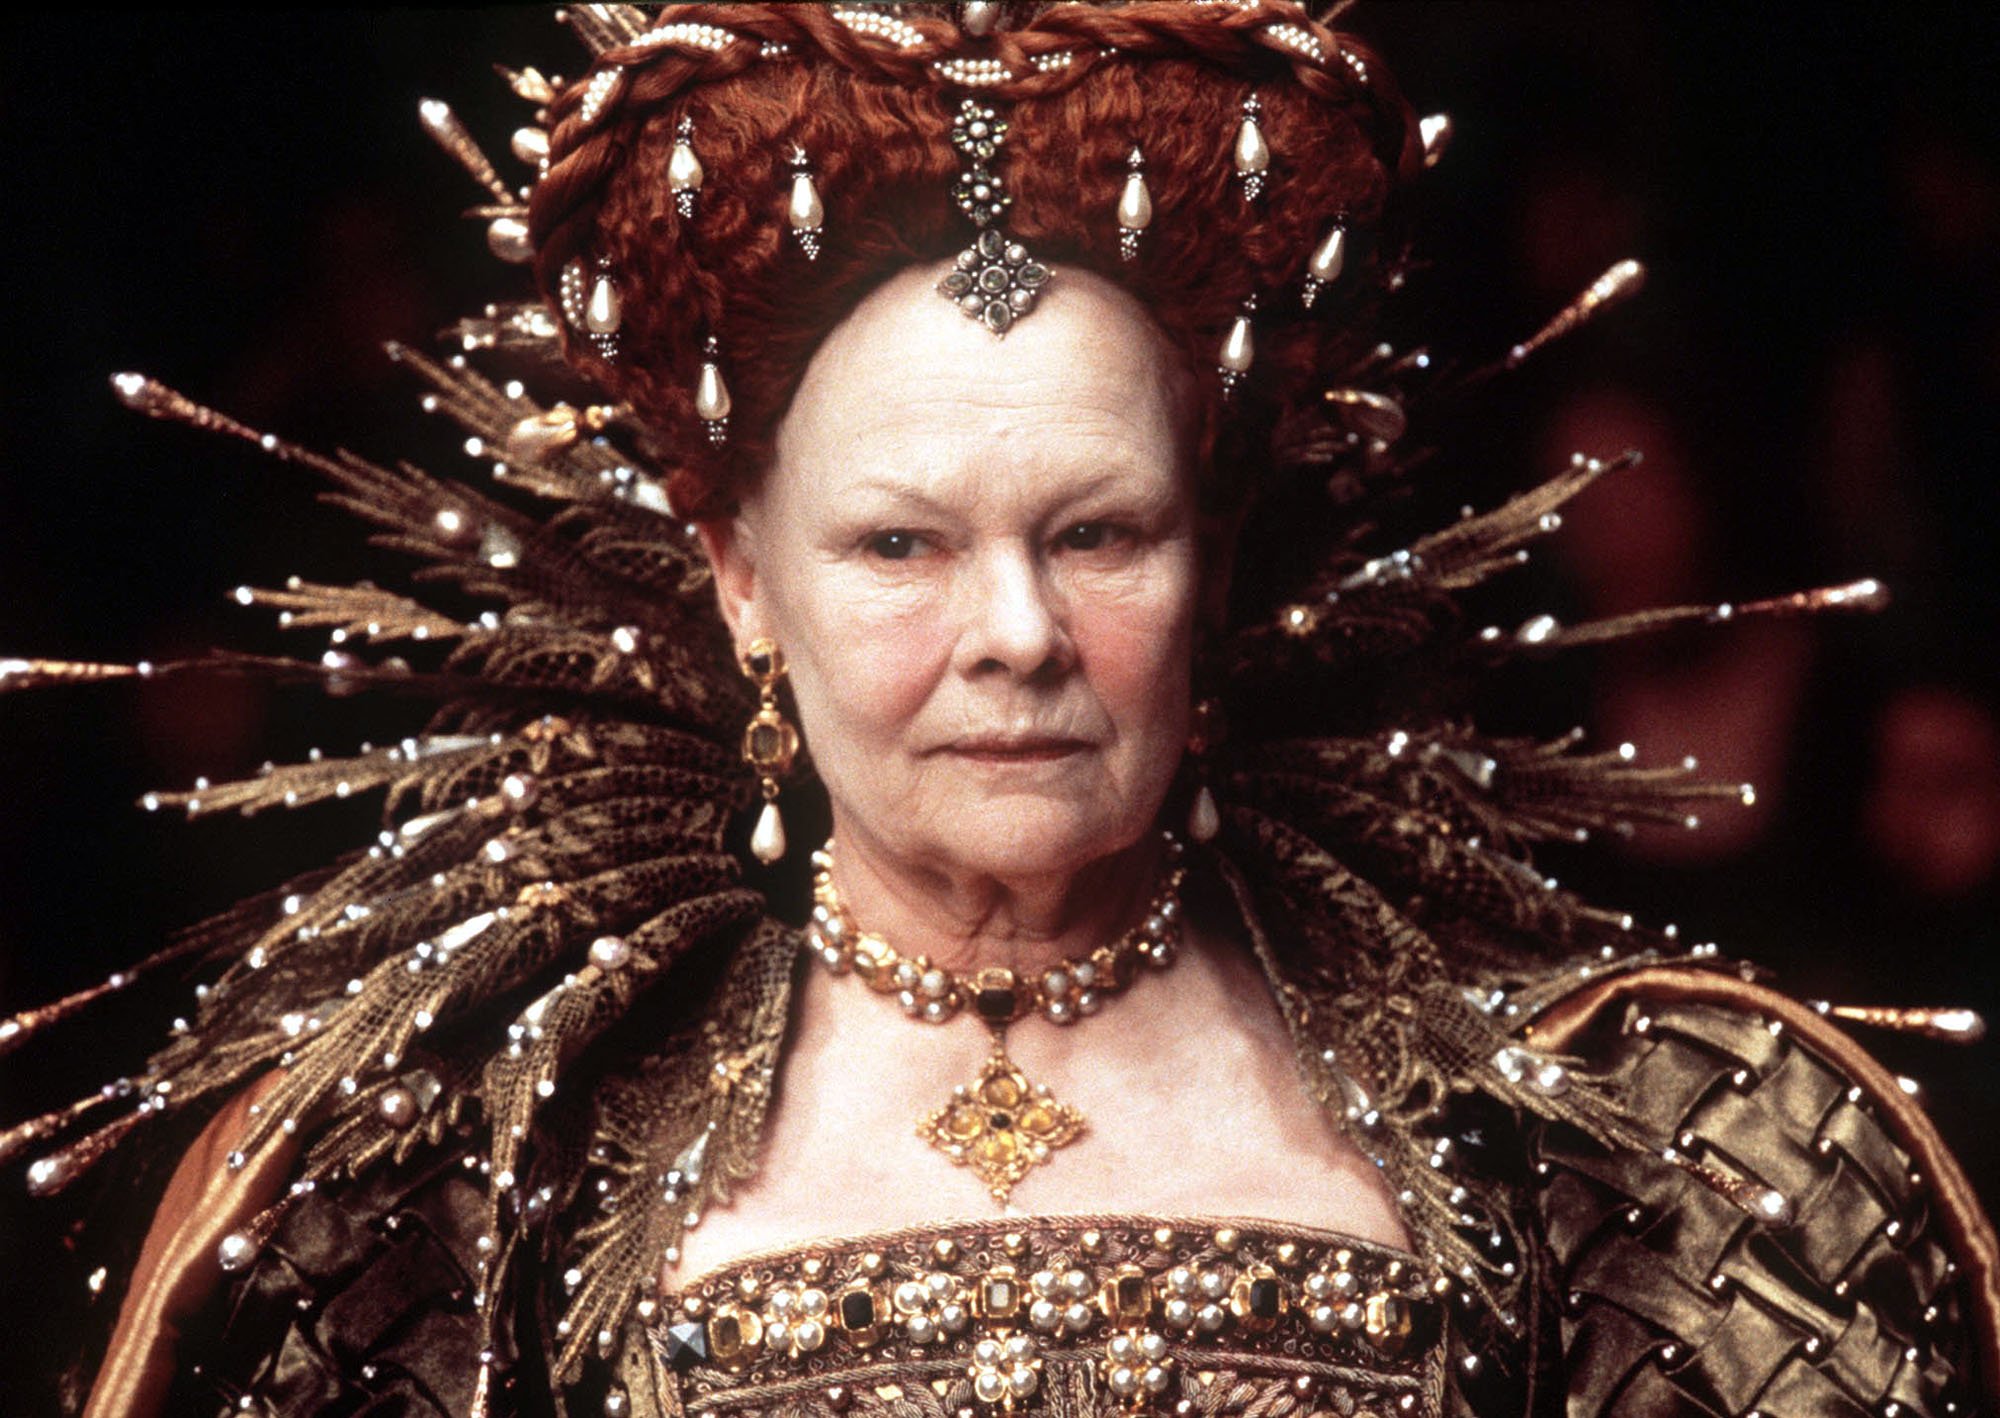 An undated image of actress Judi Dench playing Queen Elizabeth I in the film "Shakespeare in Love" | Photo: Getty Images 